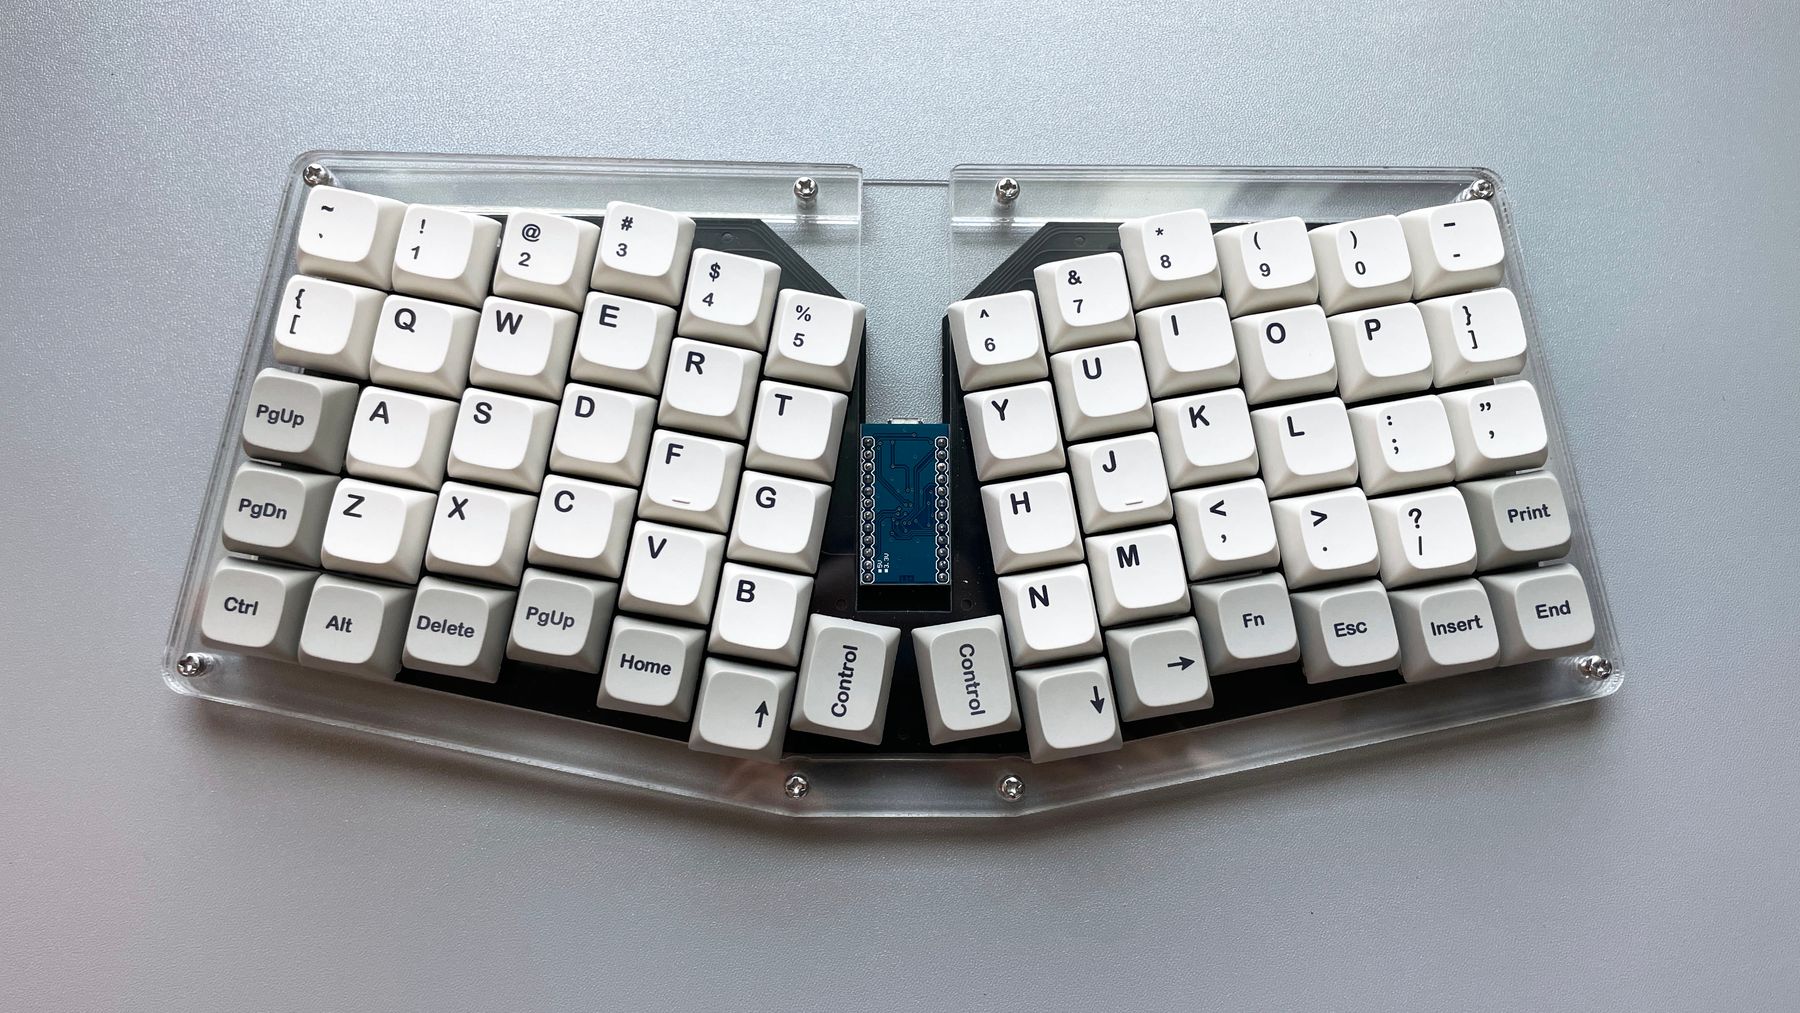 New 60% hotswappable keyboard that supports both Low Profile Choc / MX key switches